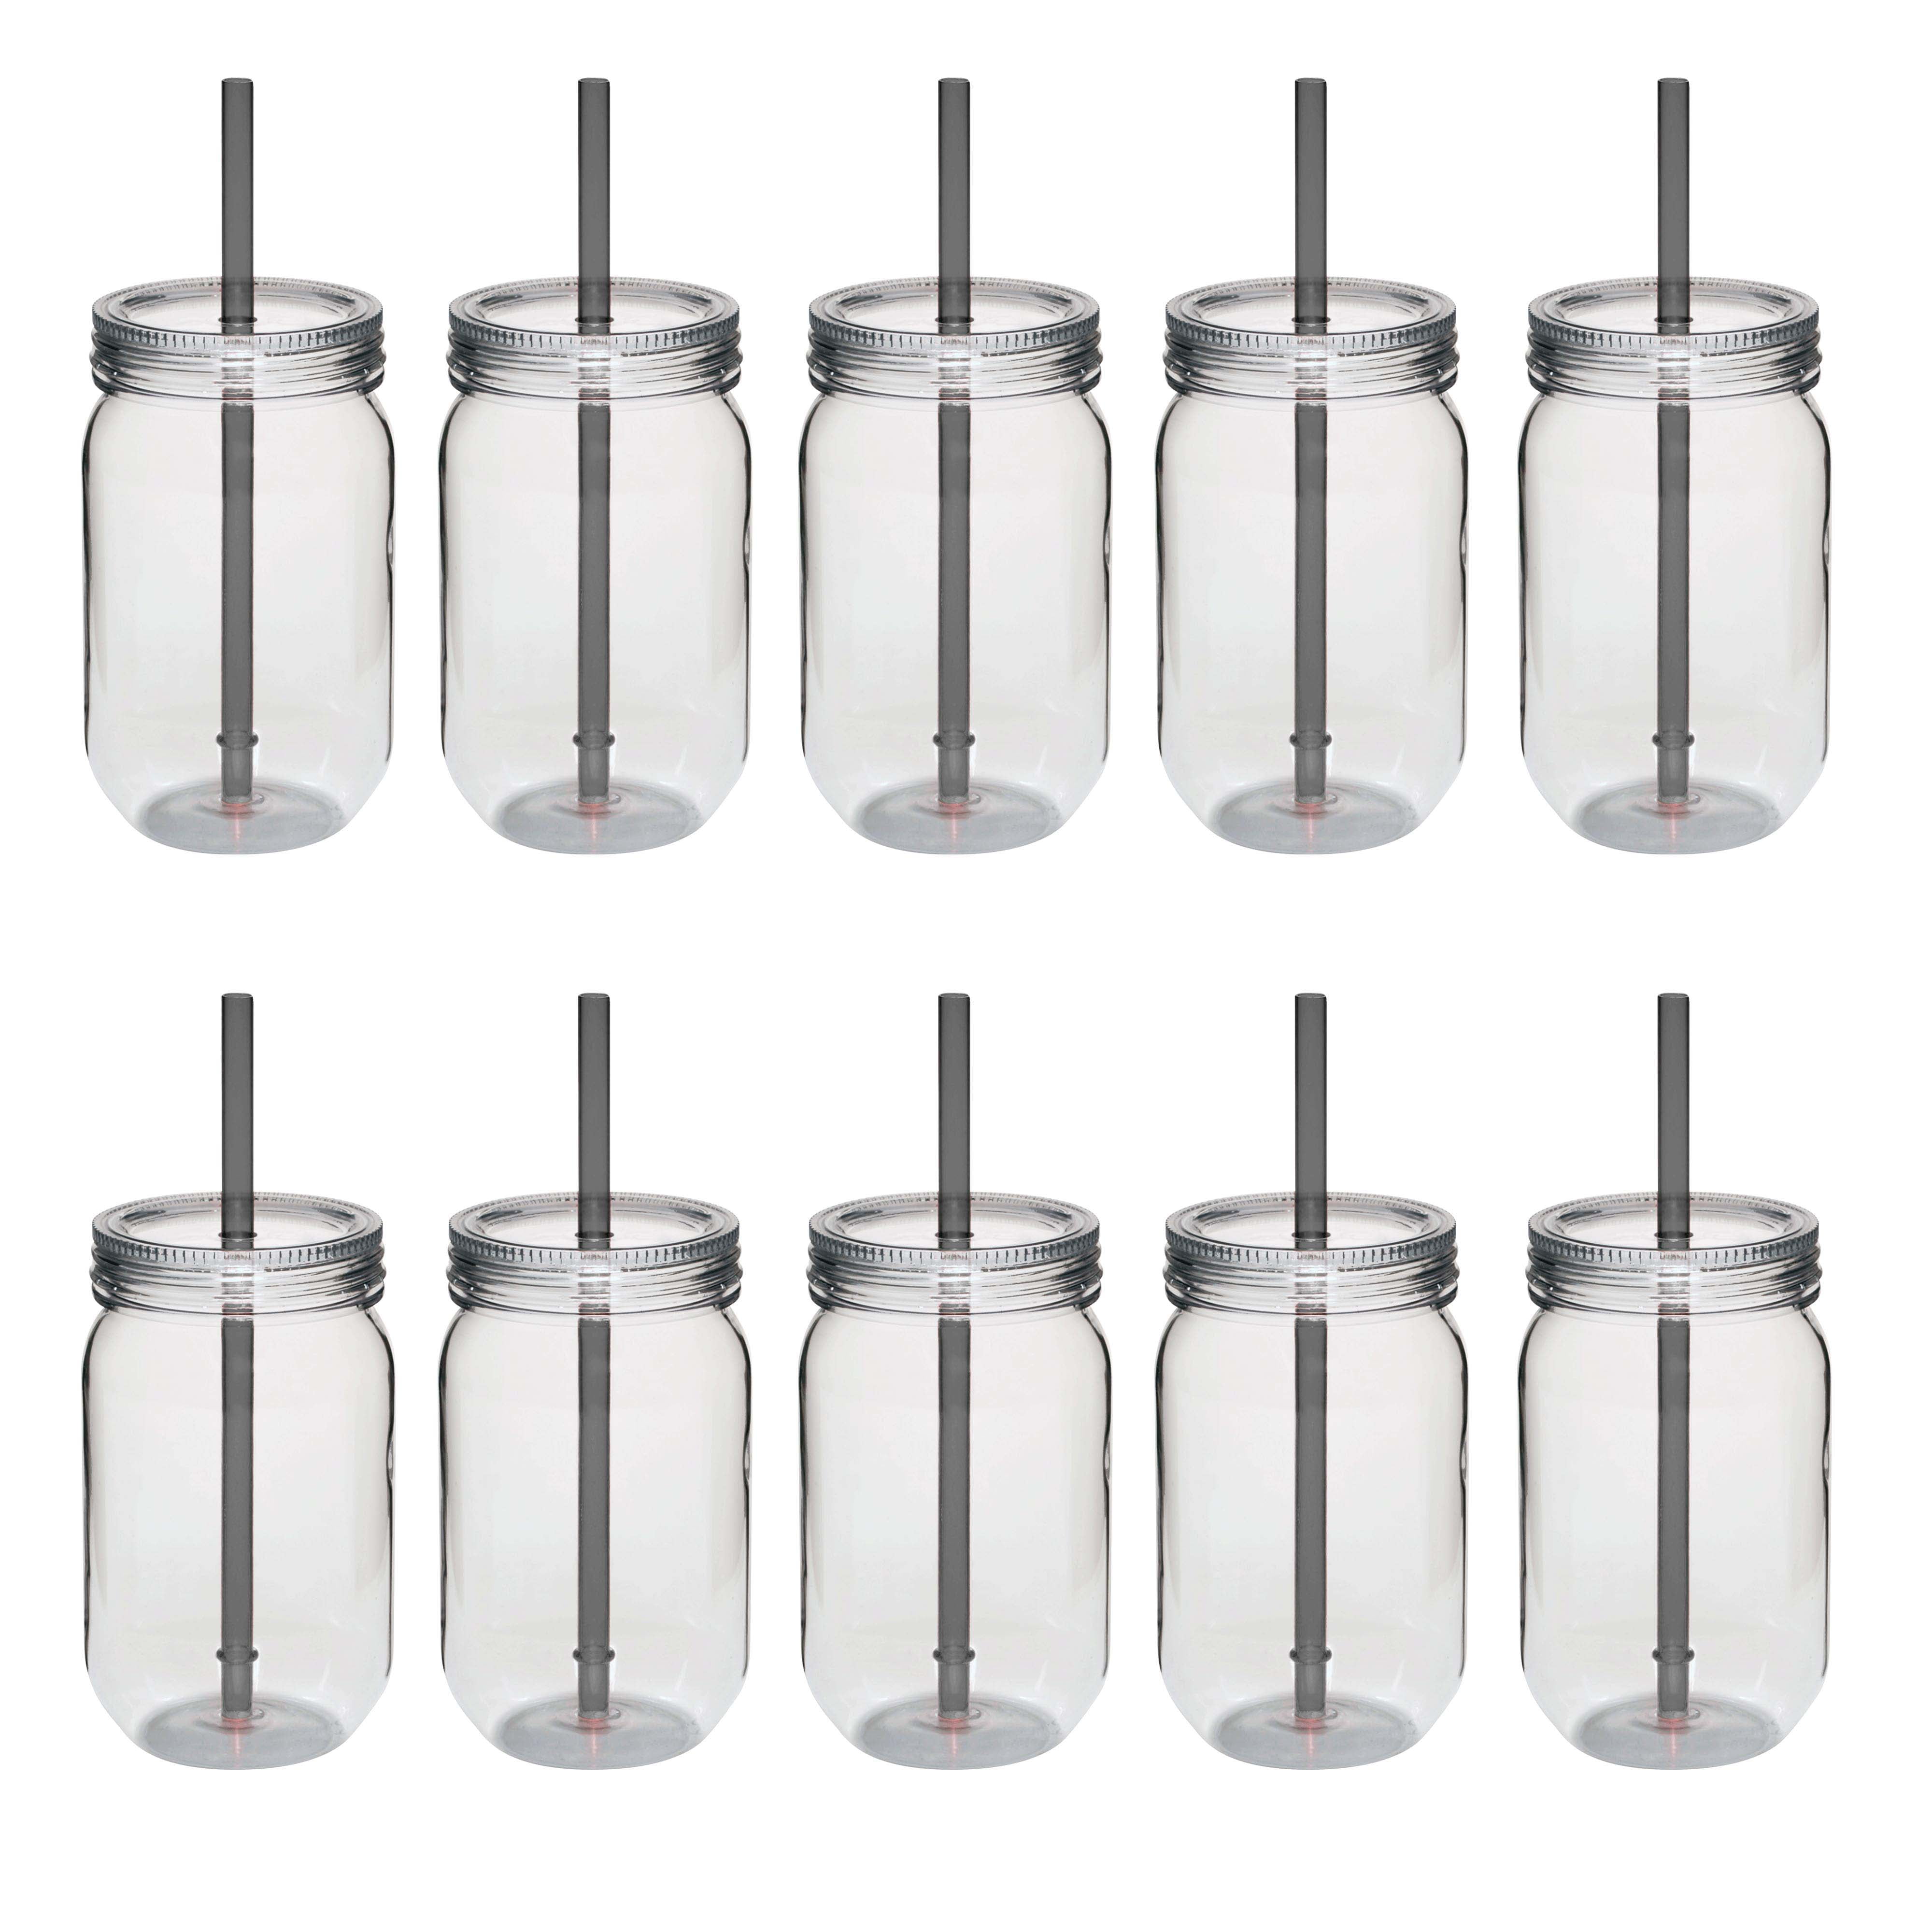 DWTS DANWEITESI Mason Jar with Lid and Straw, 24oz Glass Cups-Wide Mouth  Reusable Drinking Glasses,I…See more DWTS DANWEITESI Mason Jar with Lid and